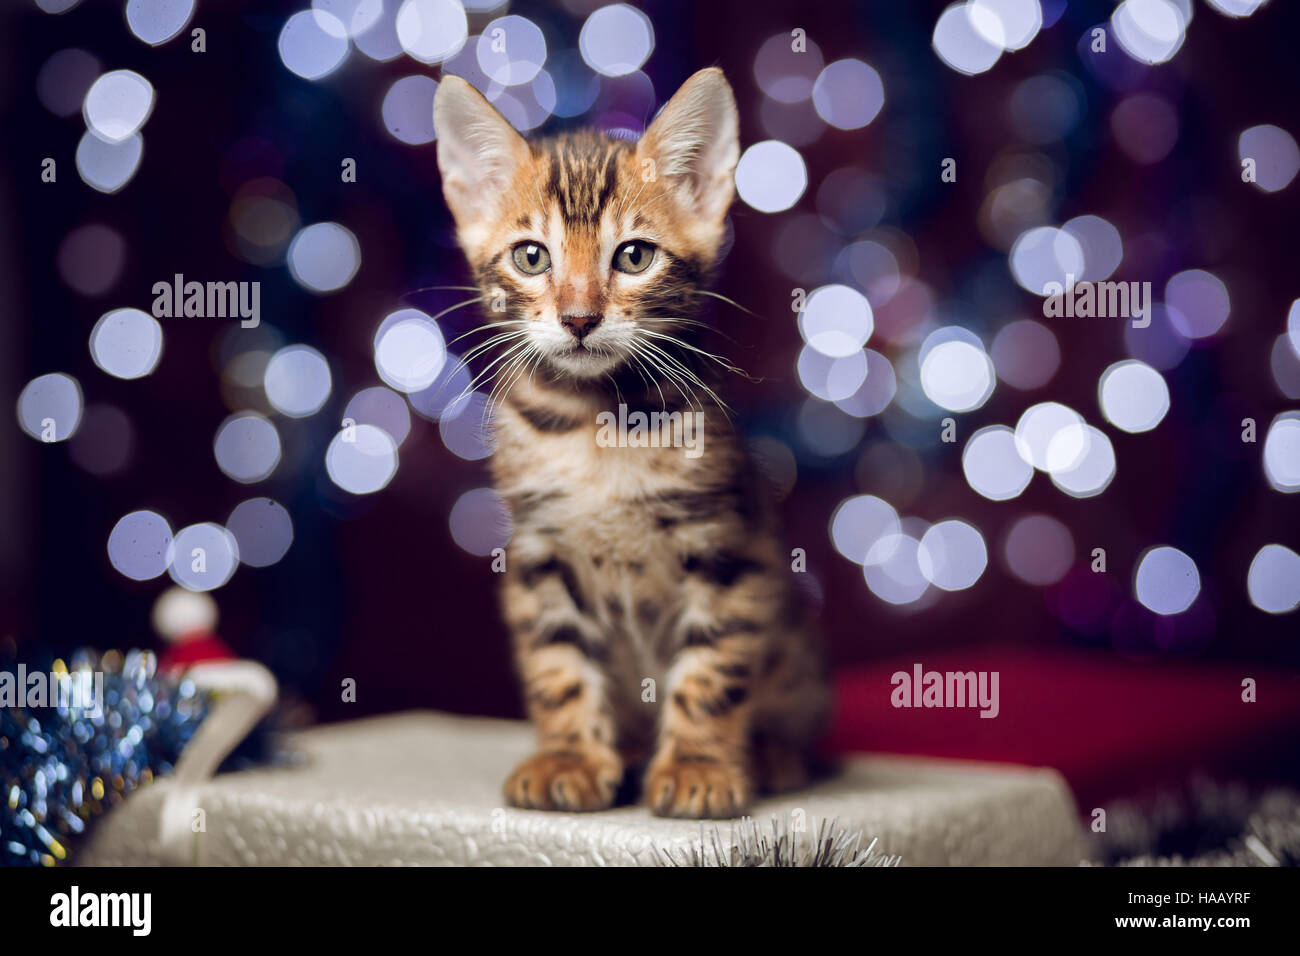 Kitten sitting on a gift box with bokeh background Stock Photo